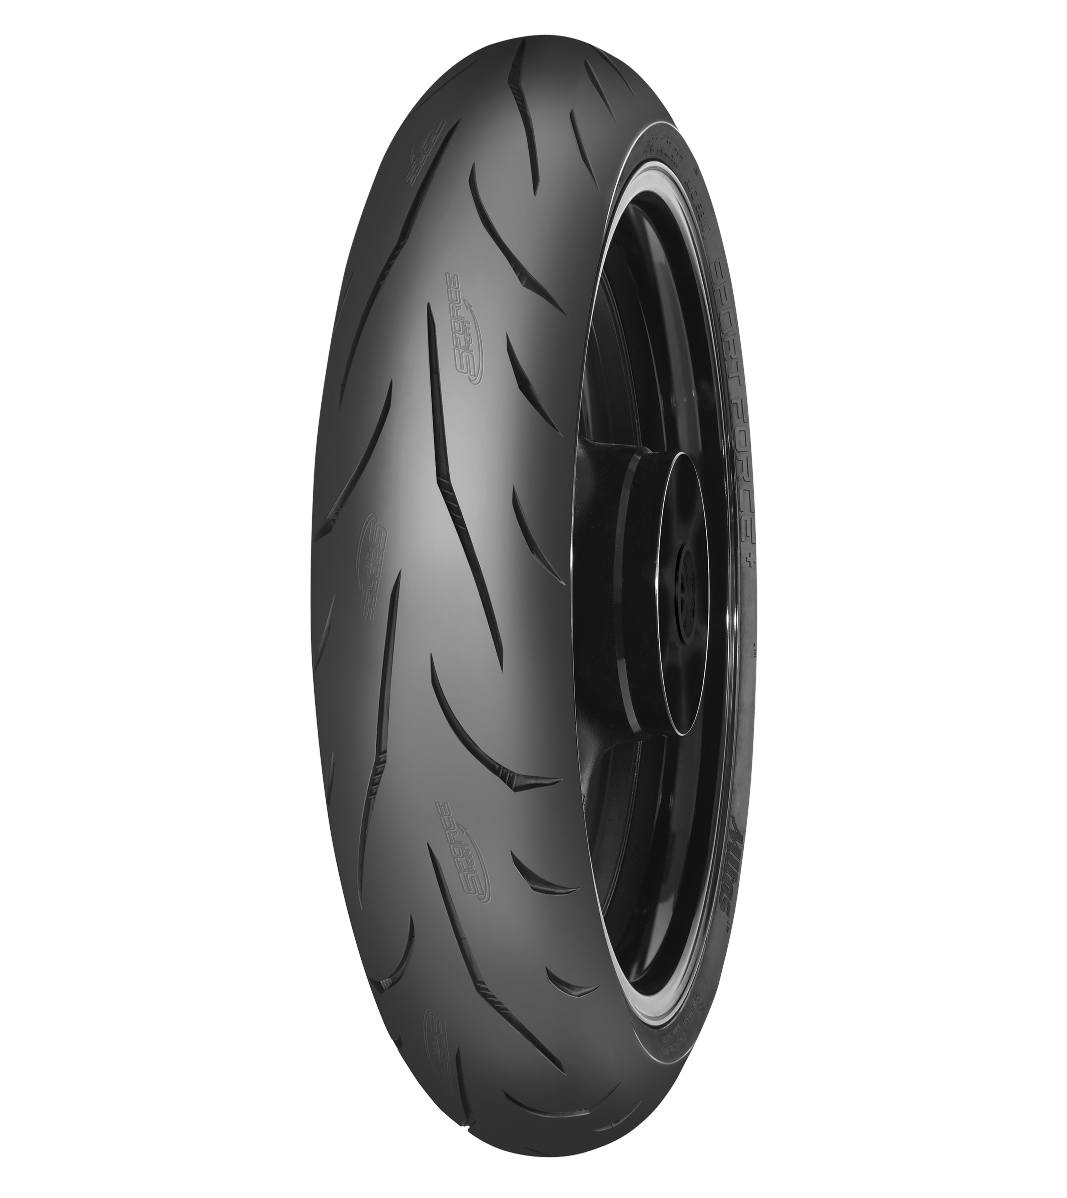 Mitas SPORT FORCE+ 110/70ZR17 Motorcycle Sport On-Road (54W) No Stripe Tubeless Front Tire, 566456, 110/70ZR17, Front, Motorcycle Sport, On-Road, Sport, Sport Force+, Sport Touring, Tires - Imported and distributed in North & South America by Lindeco Genuine Powersports - Premier Powersports Equipment and Accessories for Motorcycle Enthusiasts, Professional Riders and Dealers.